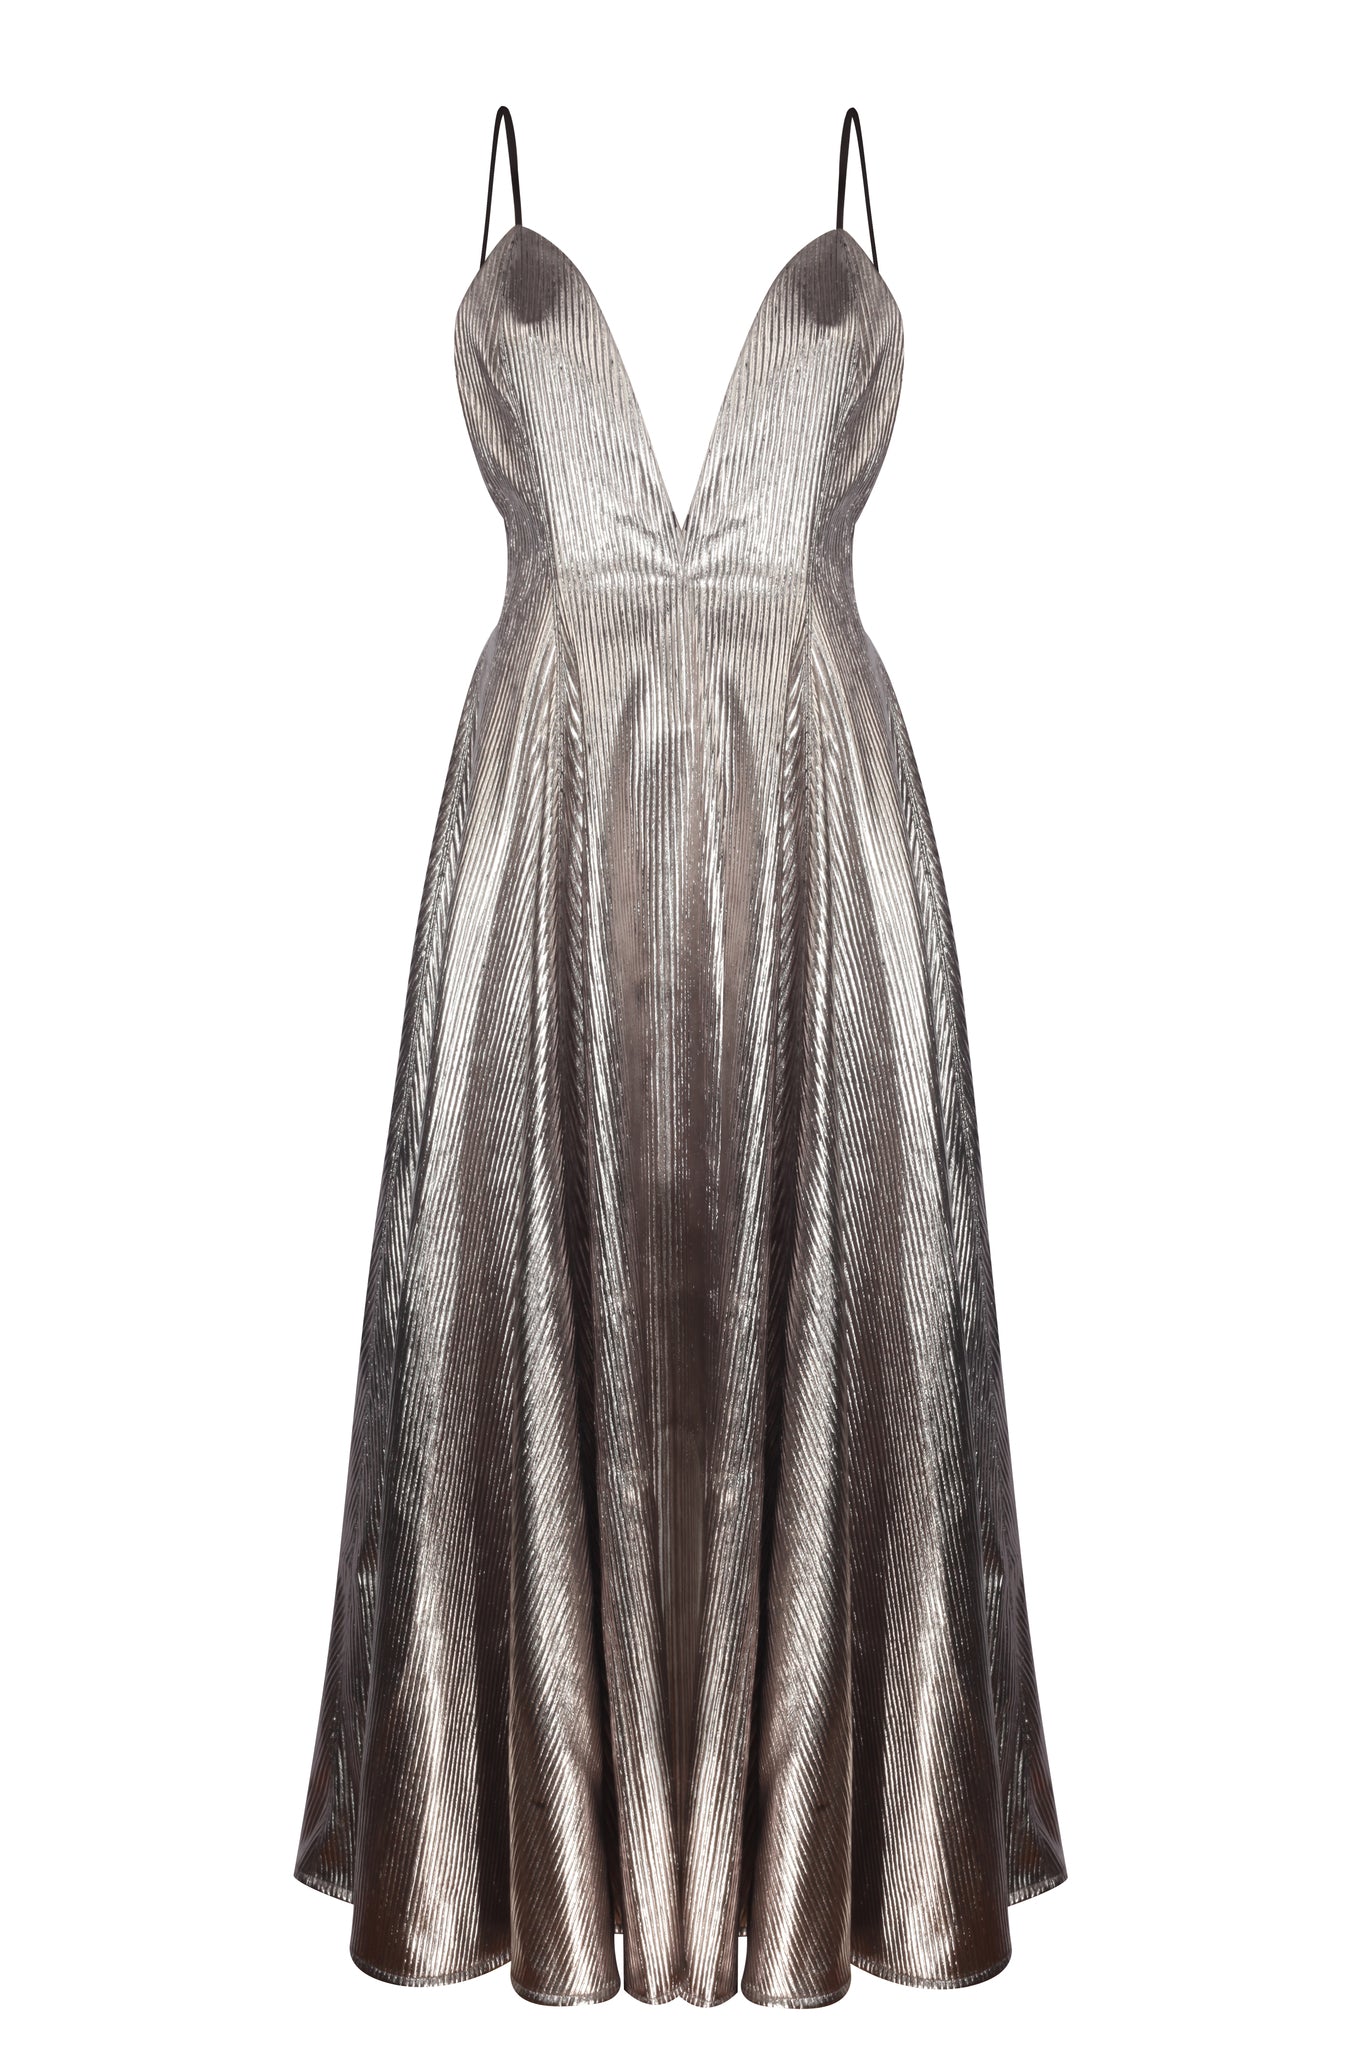 SILVER FAUX LEATHER DRESS